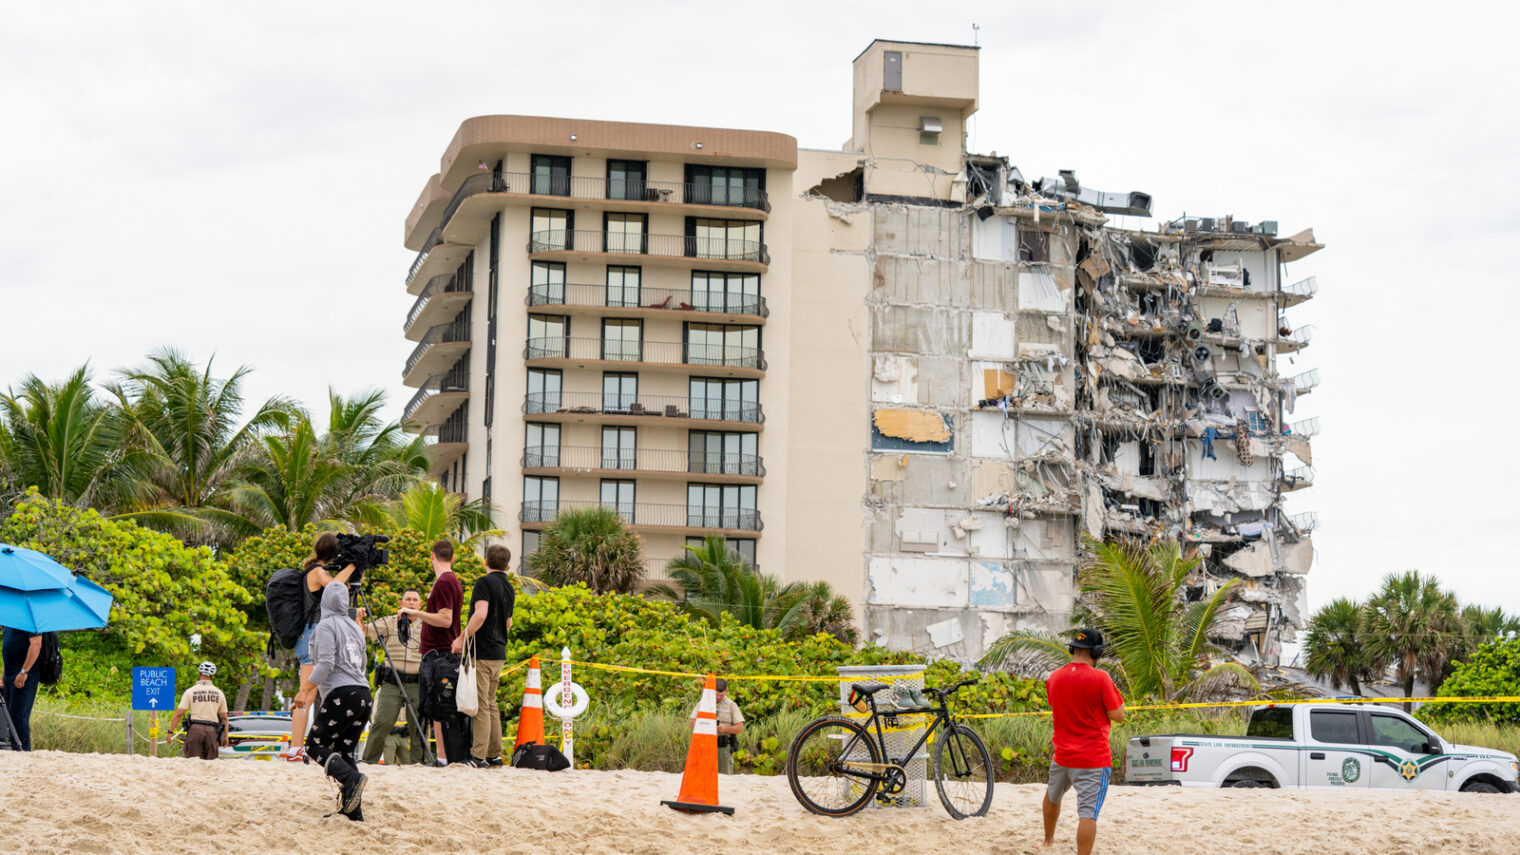 People watch a partially collapsed building in Surfside, Florida, June 24, 2021. Photo by Fernando Medina via Shutterstock.com